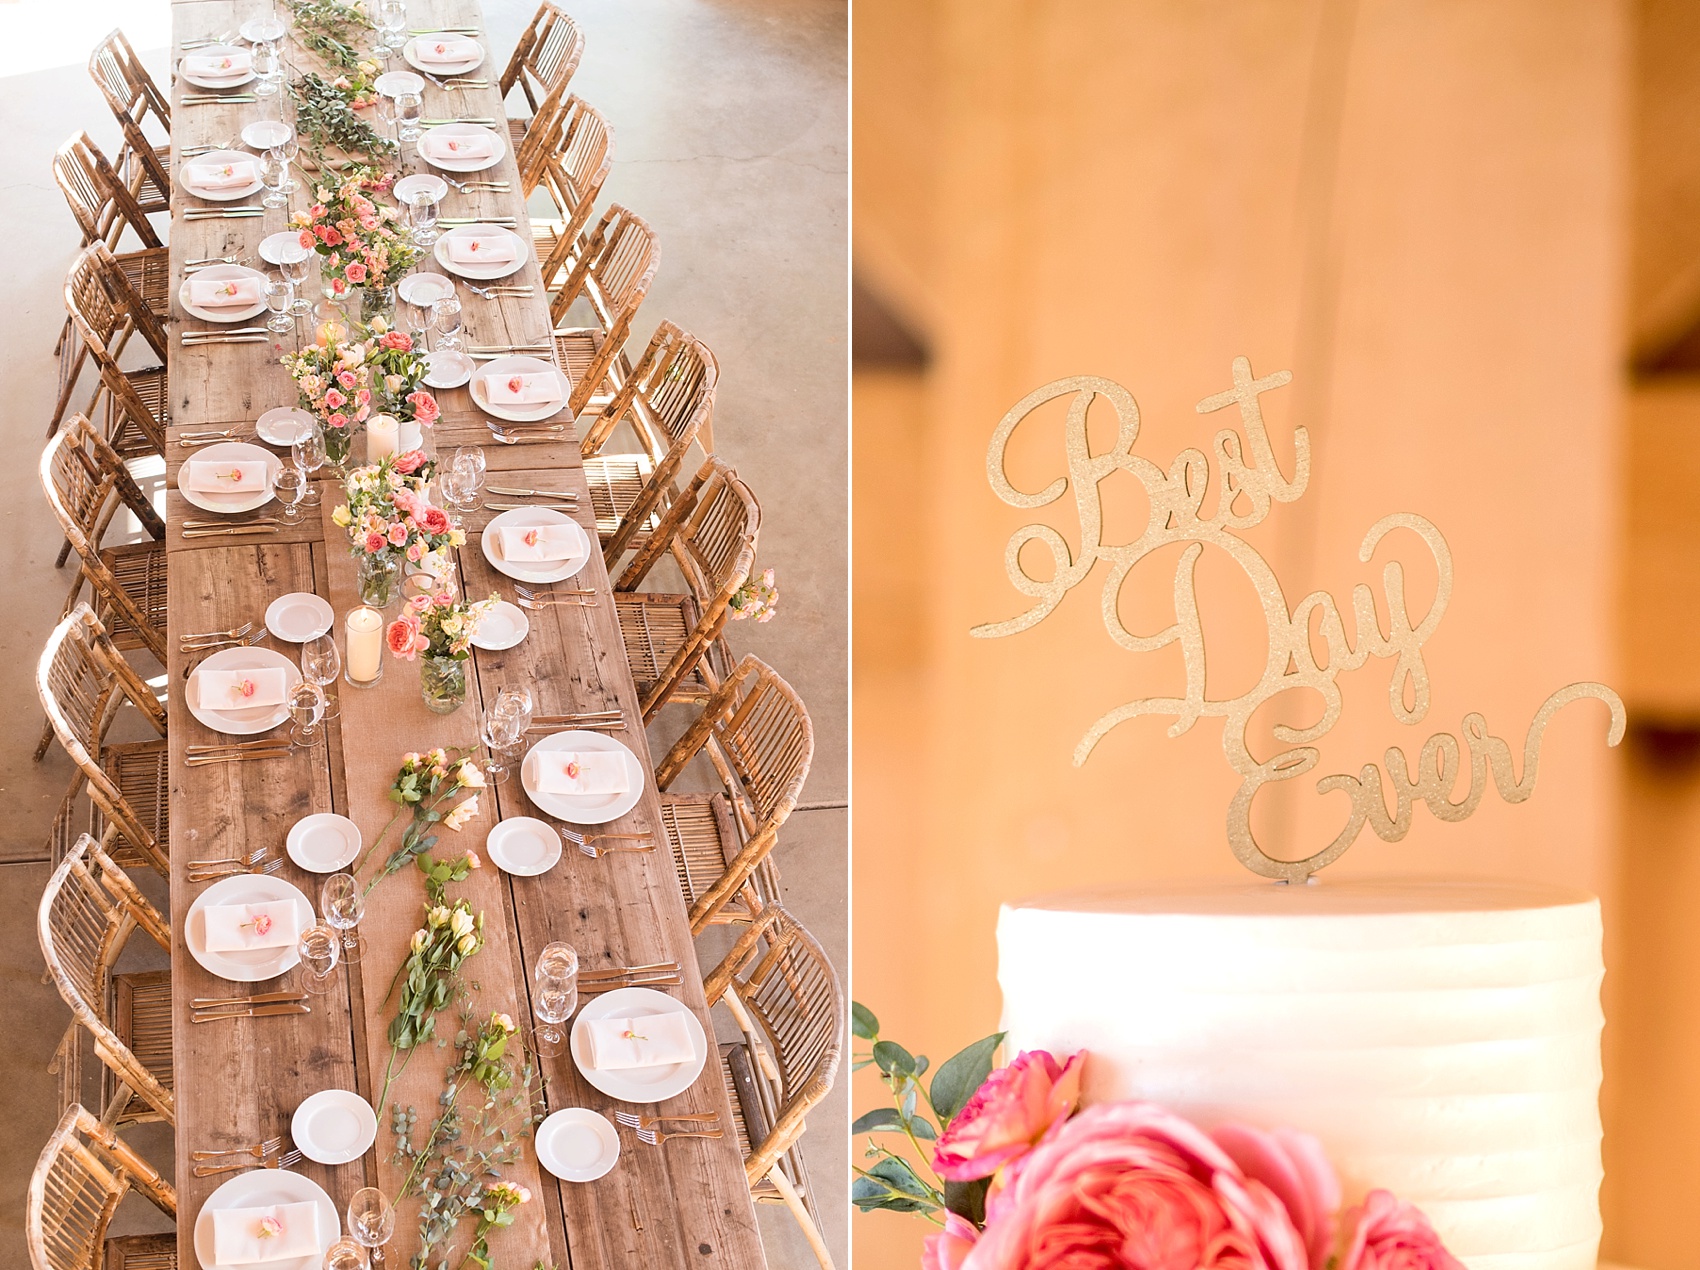 Best Day Ever script laser cut cake topper for a spring vineyard elopement with pink flowers and barn reception. Photos by Mikkel Paige, destination wedding photographer. Held at HammerSky Vineyard, south of San Francisco. 